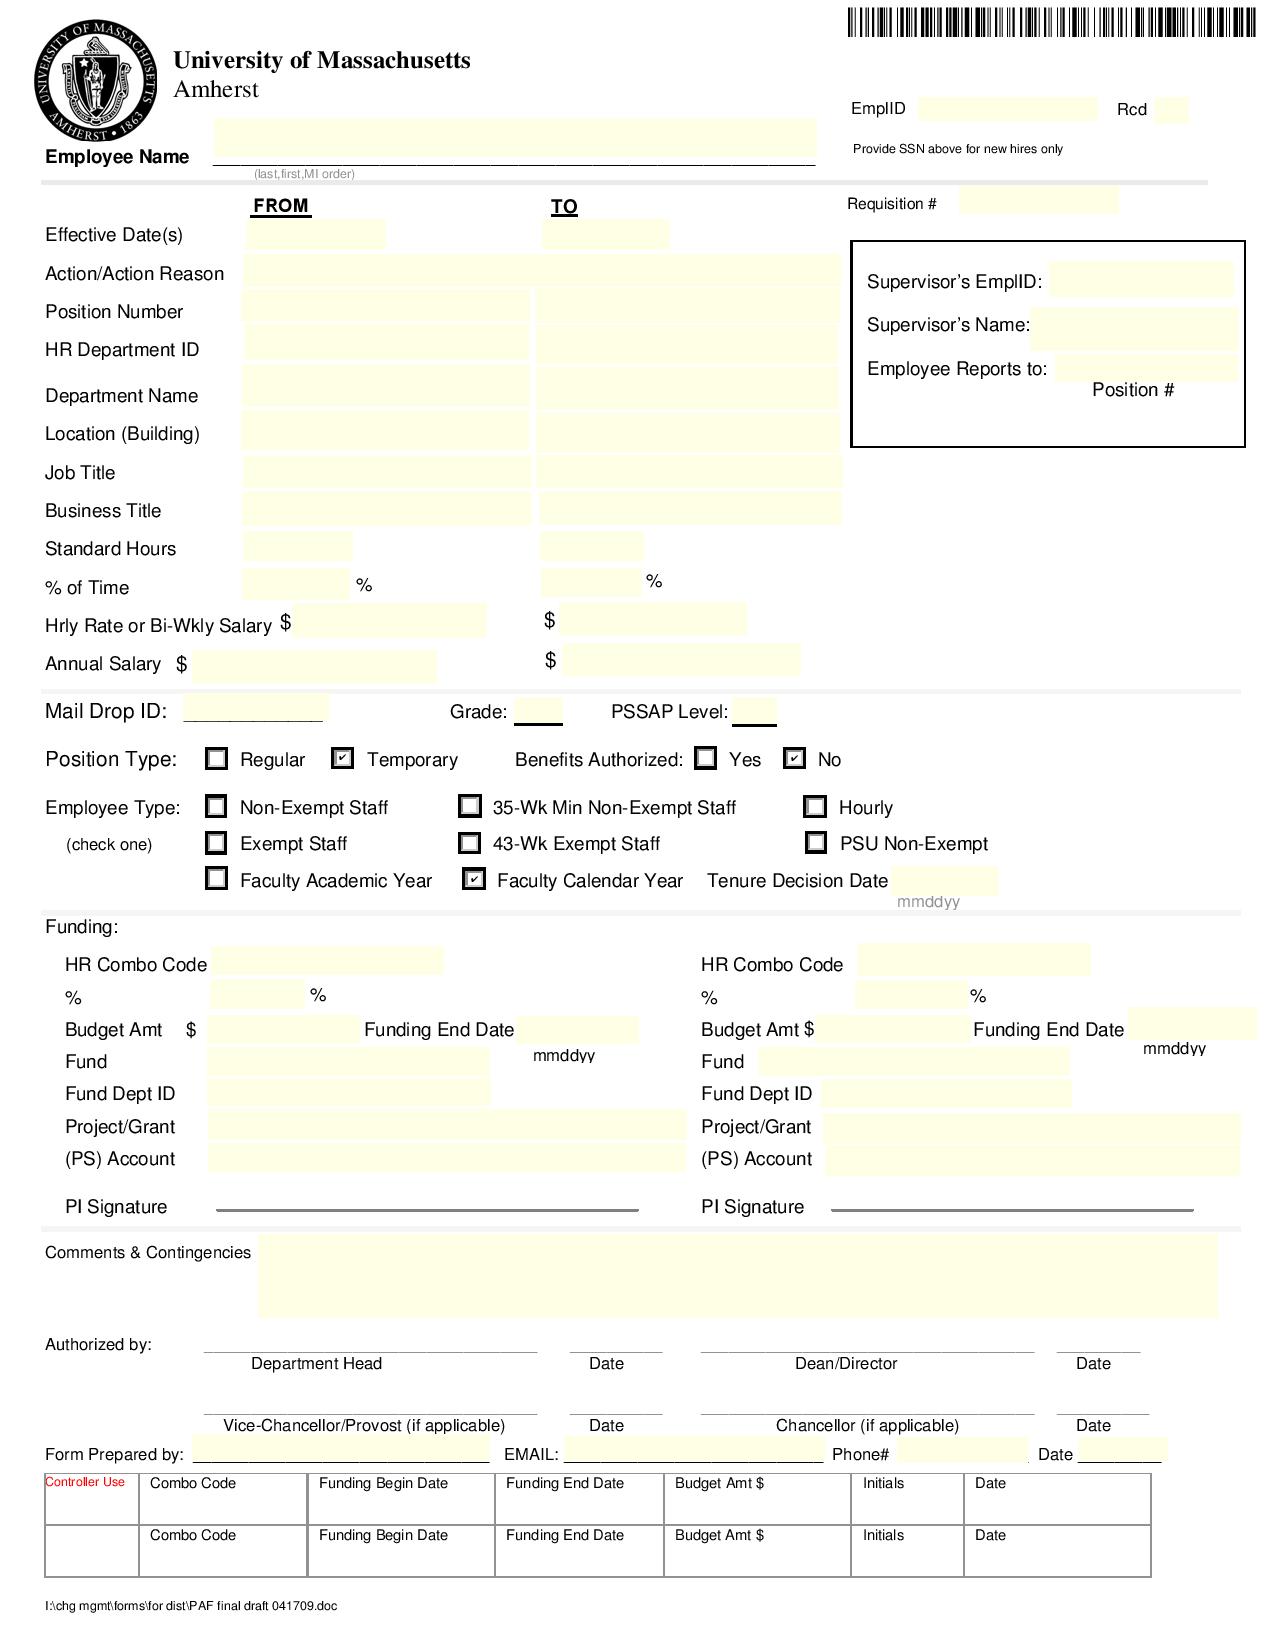 paf personnel action form template page 0011